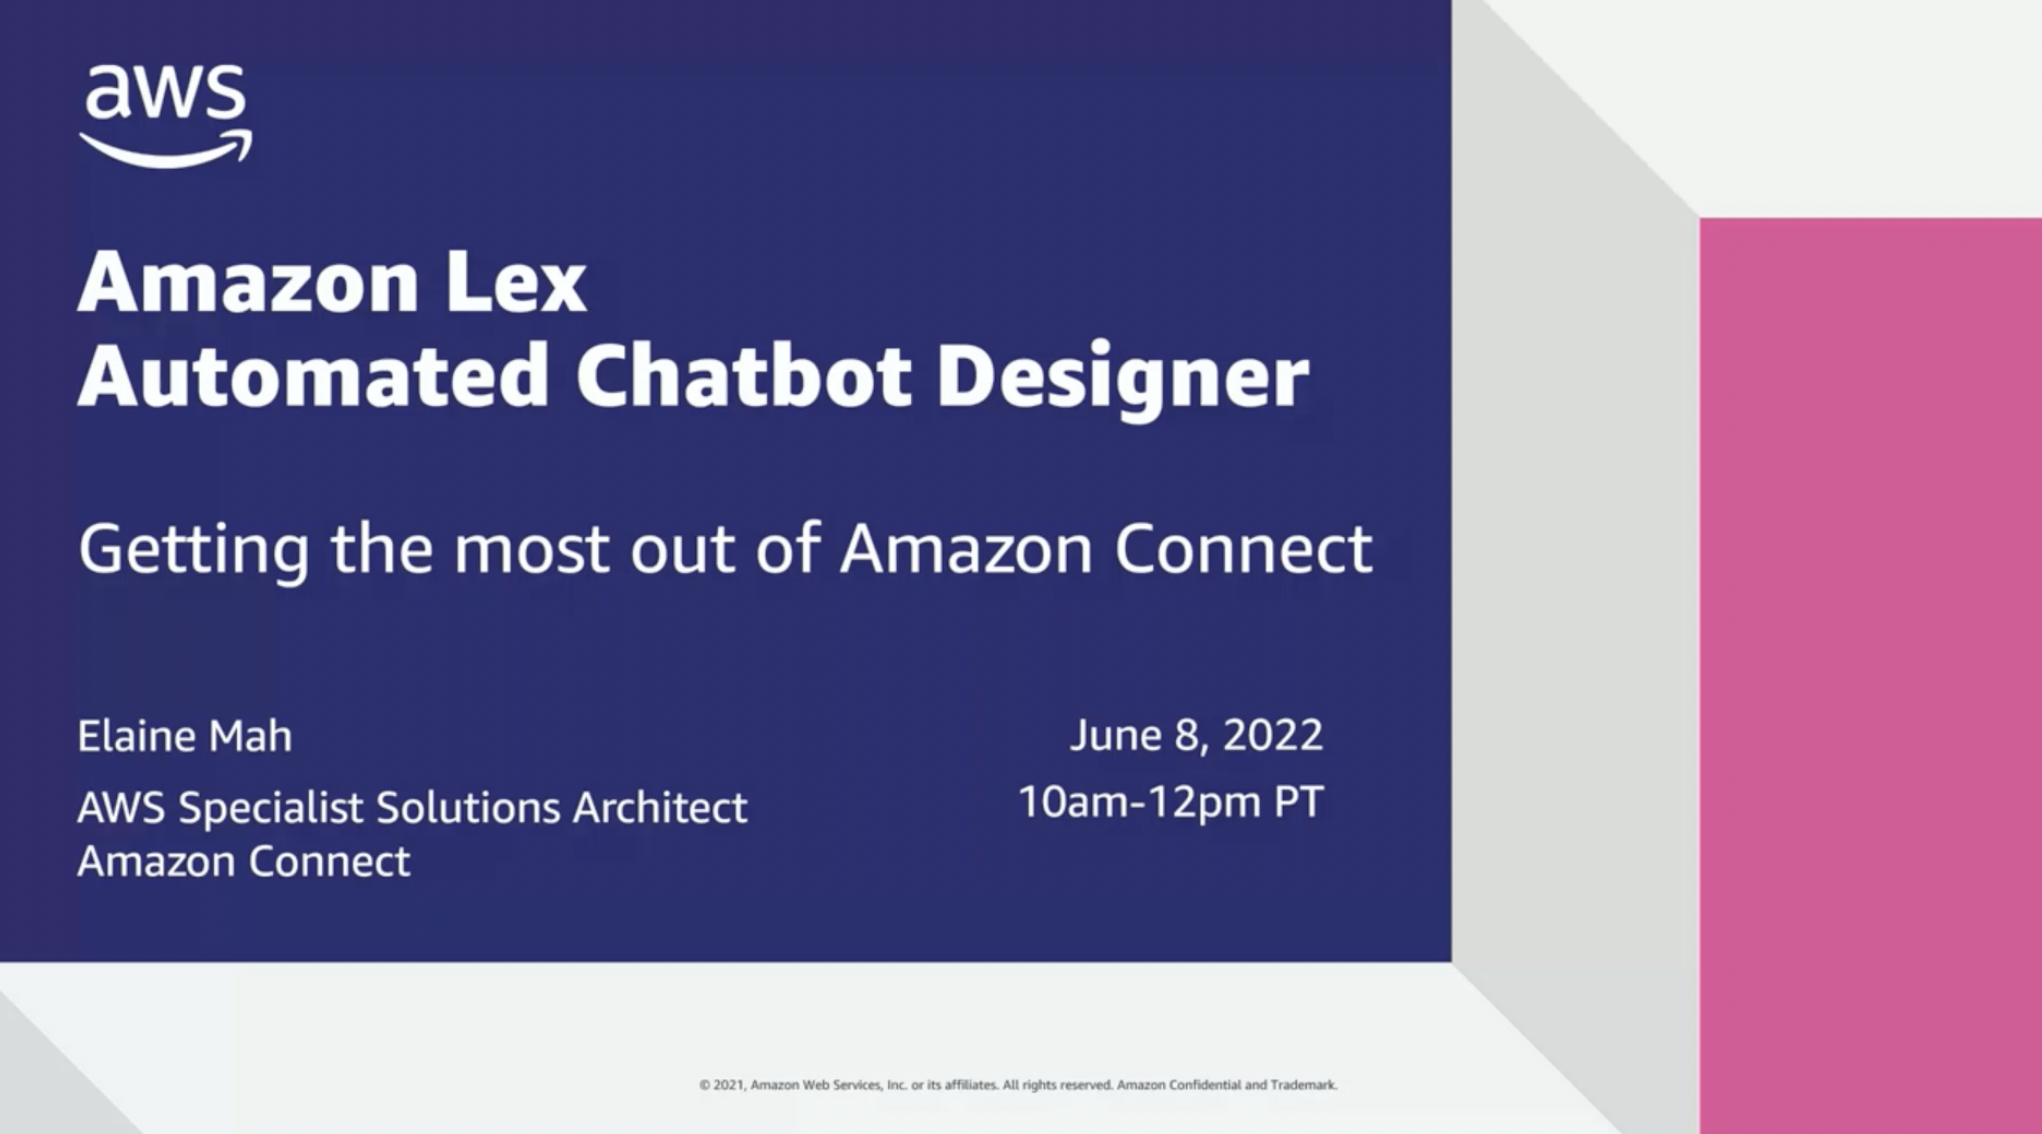 Getting the Most Out of Amazon Connect: Amazon Lex Automated Chatbot Designer